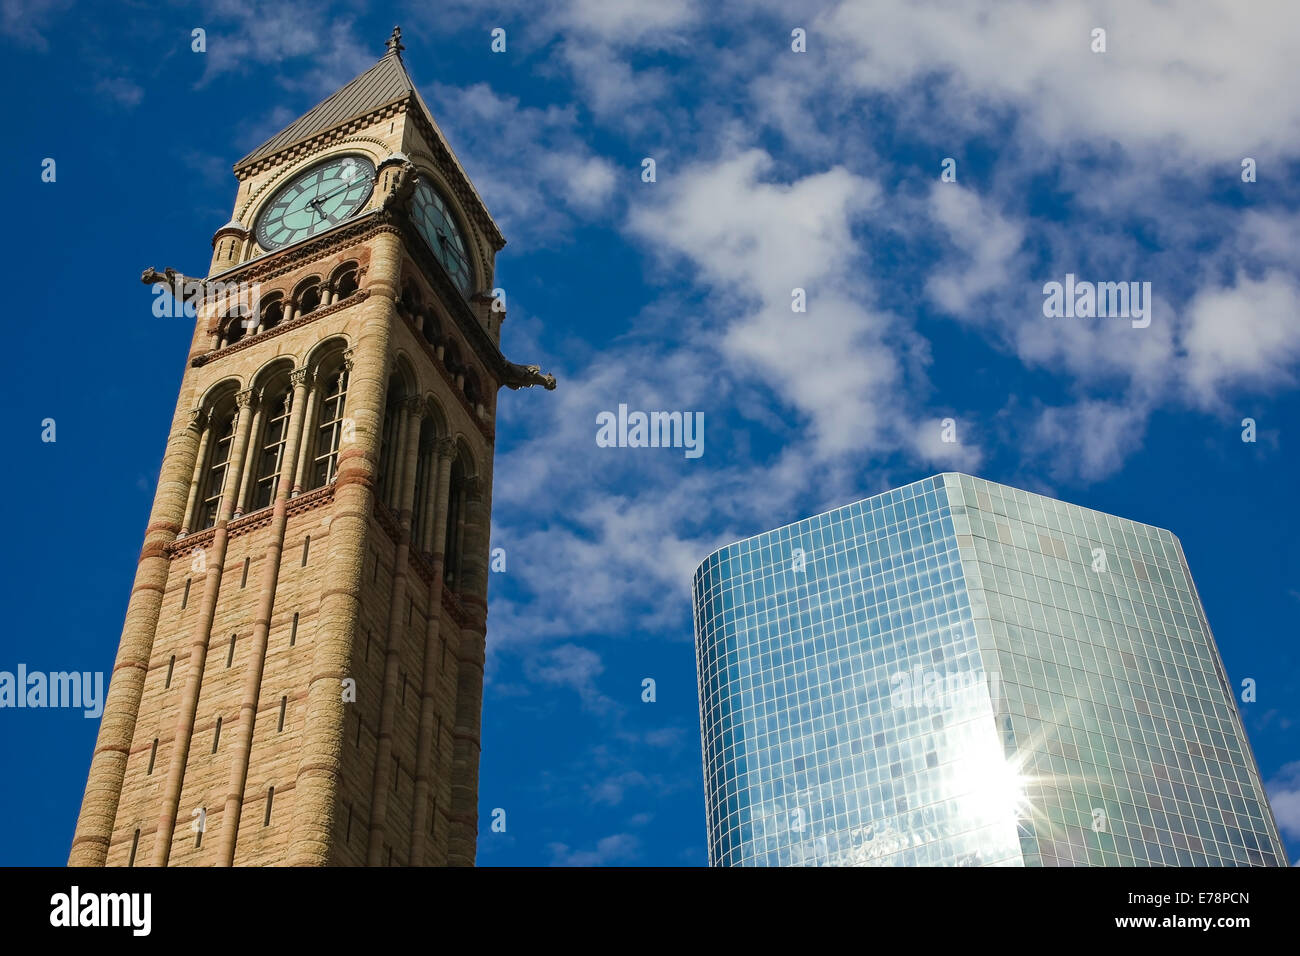 The clock tower - historic Toronto city hall - and the new glass and steel skyscraper with sun reflected in the building surface Stock Photo